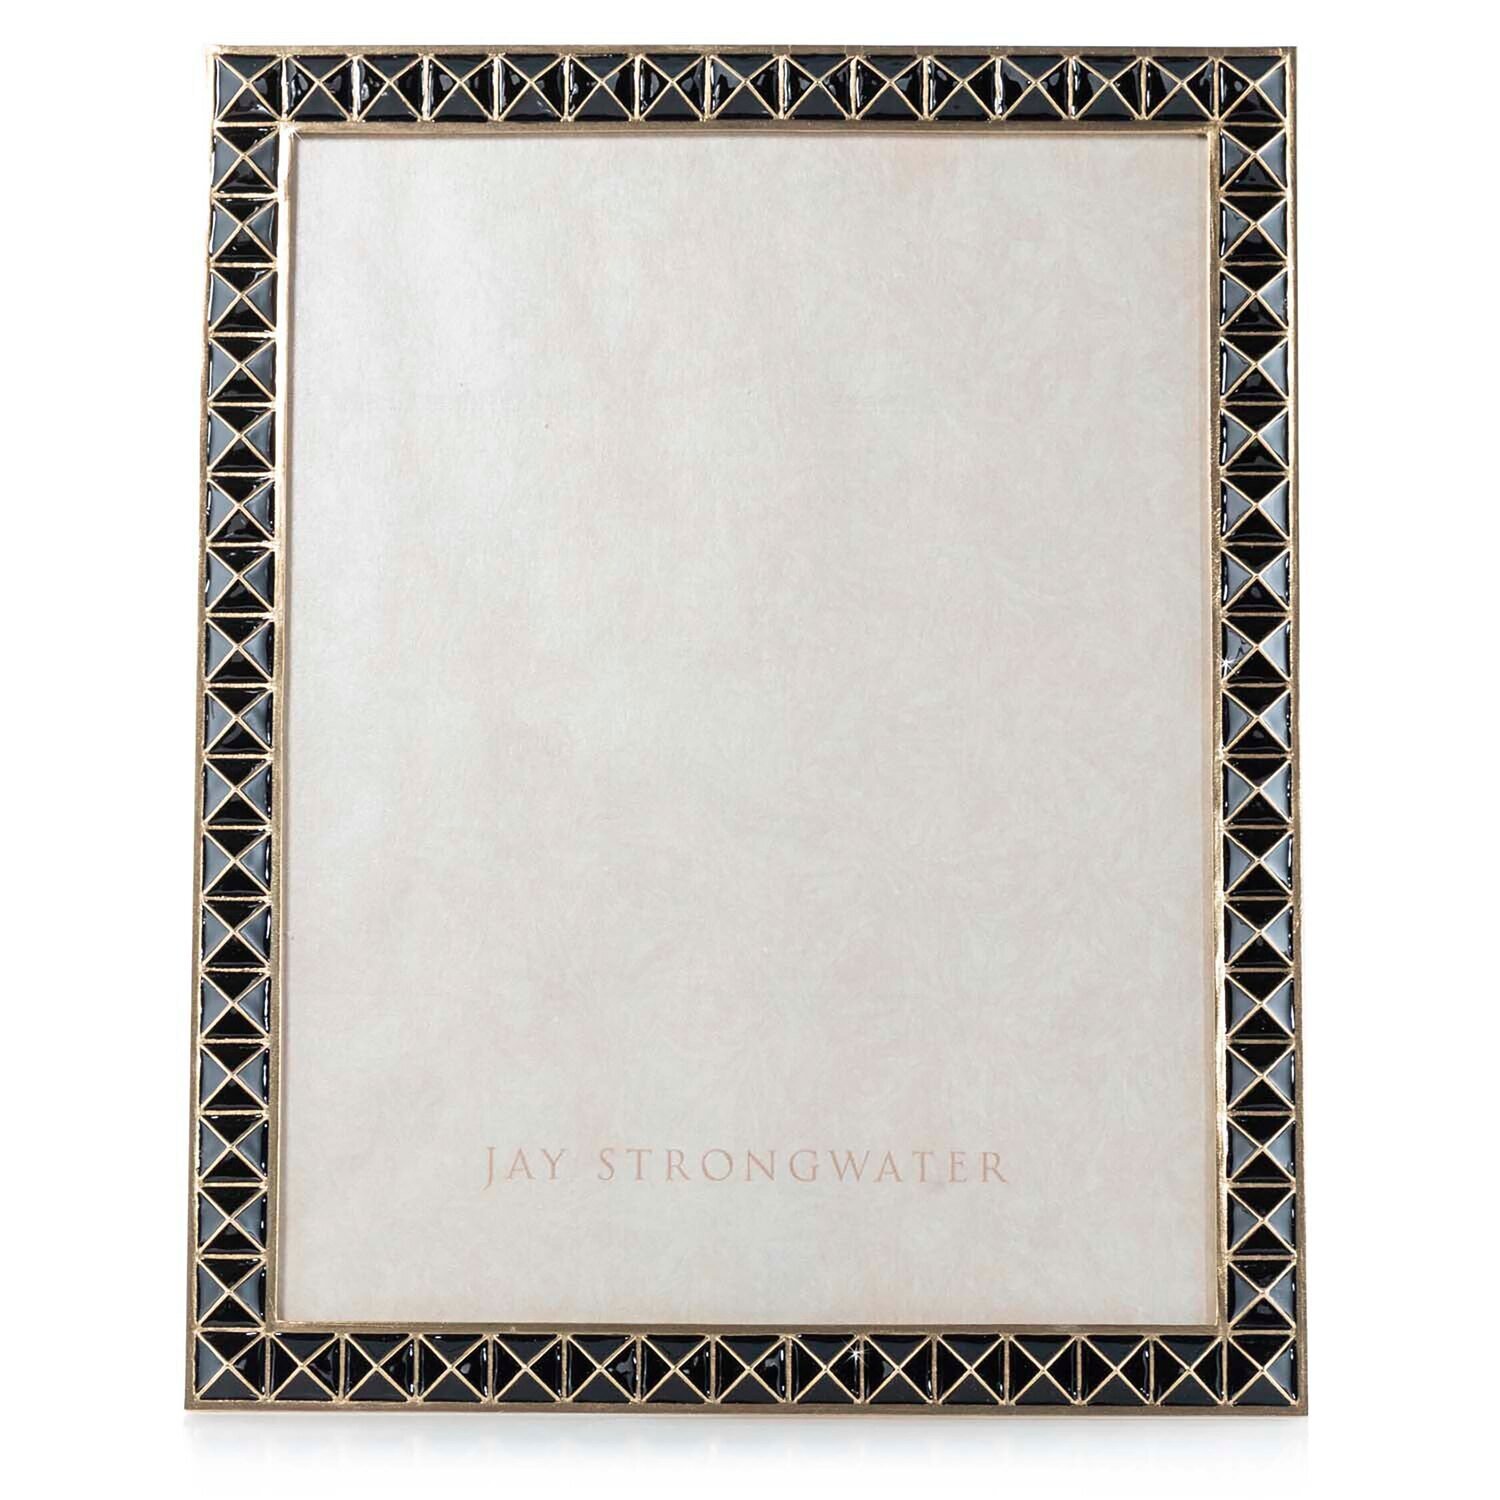 Jay Strongwater Pyramid 8 x 10 Inch Picture Frame SPF5878-220